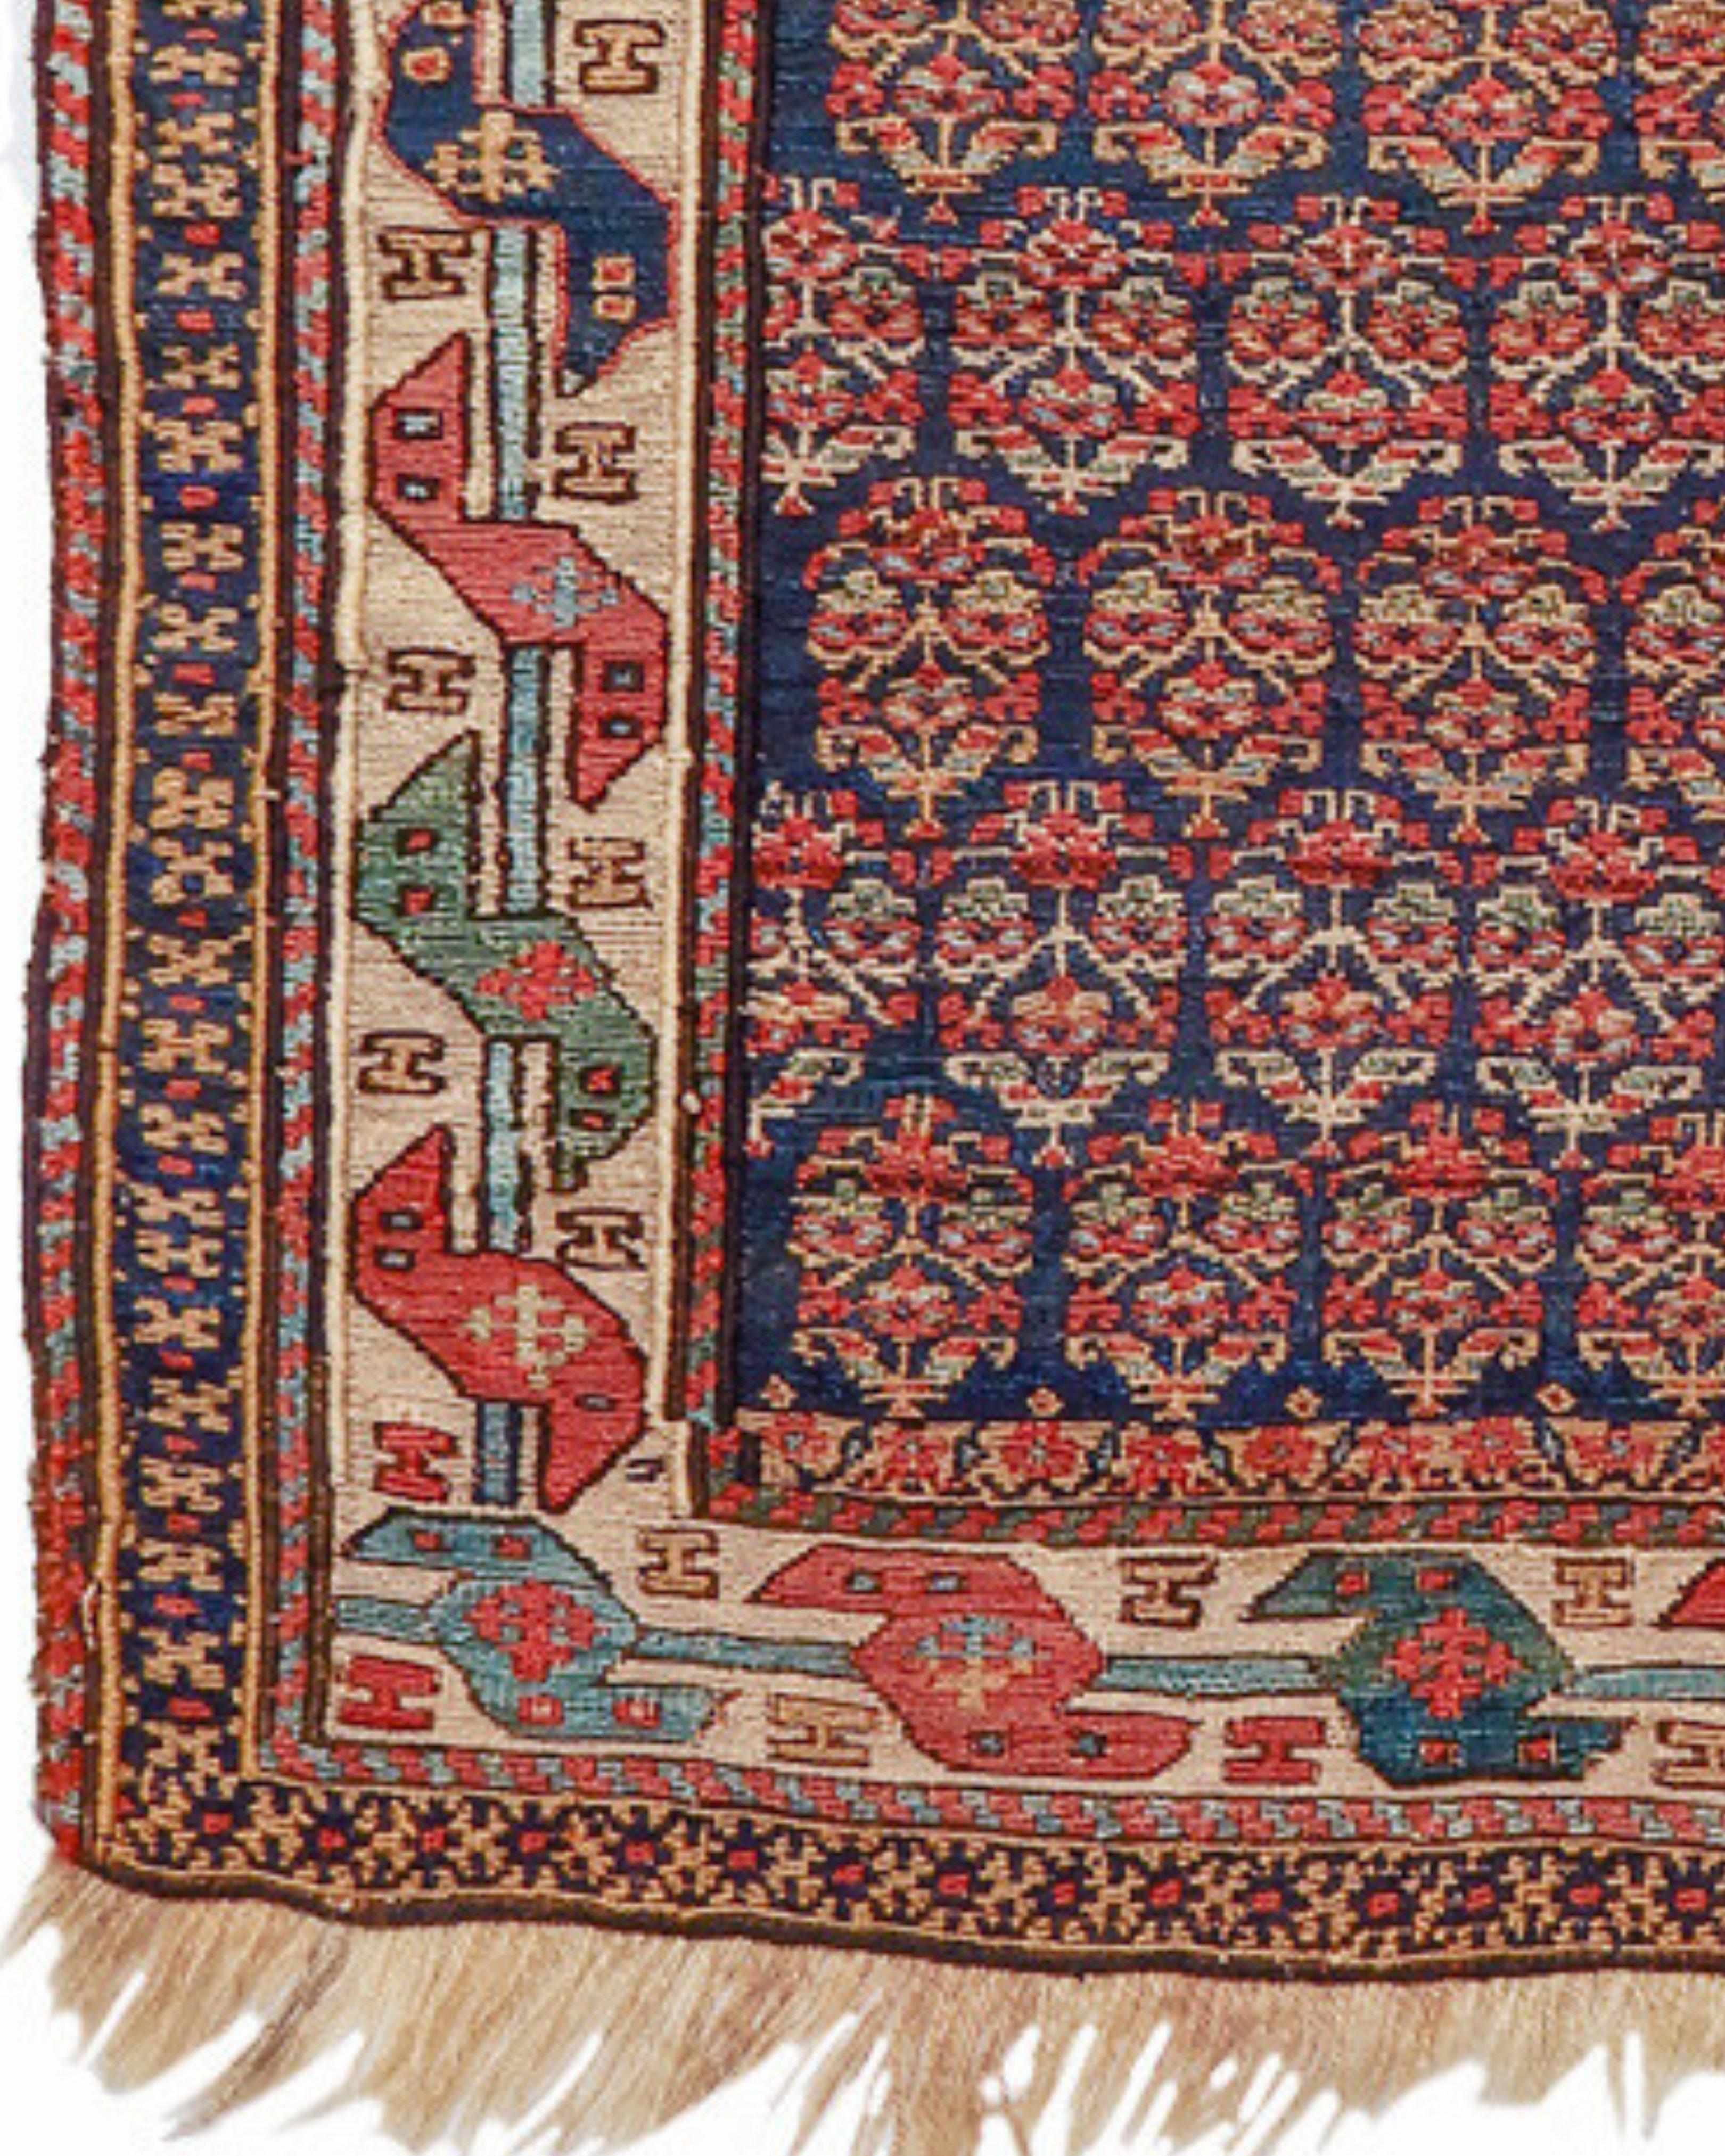 Antique Persian Shahsevan Sumak Bagface, 19th Century In Good Condition For Sale In San Francisco, CA